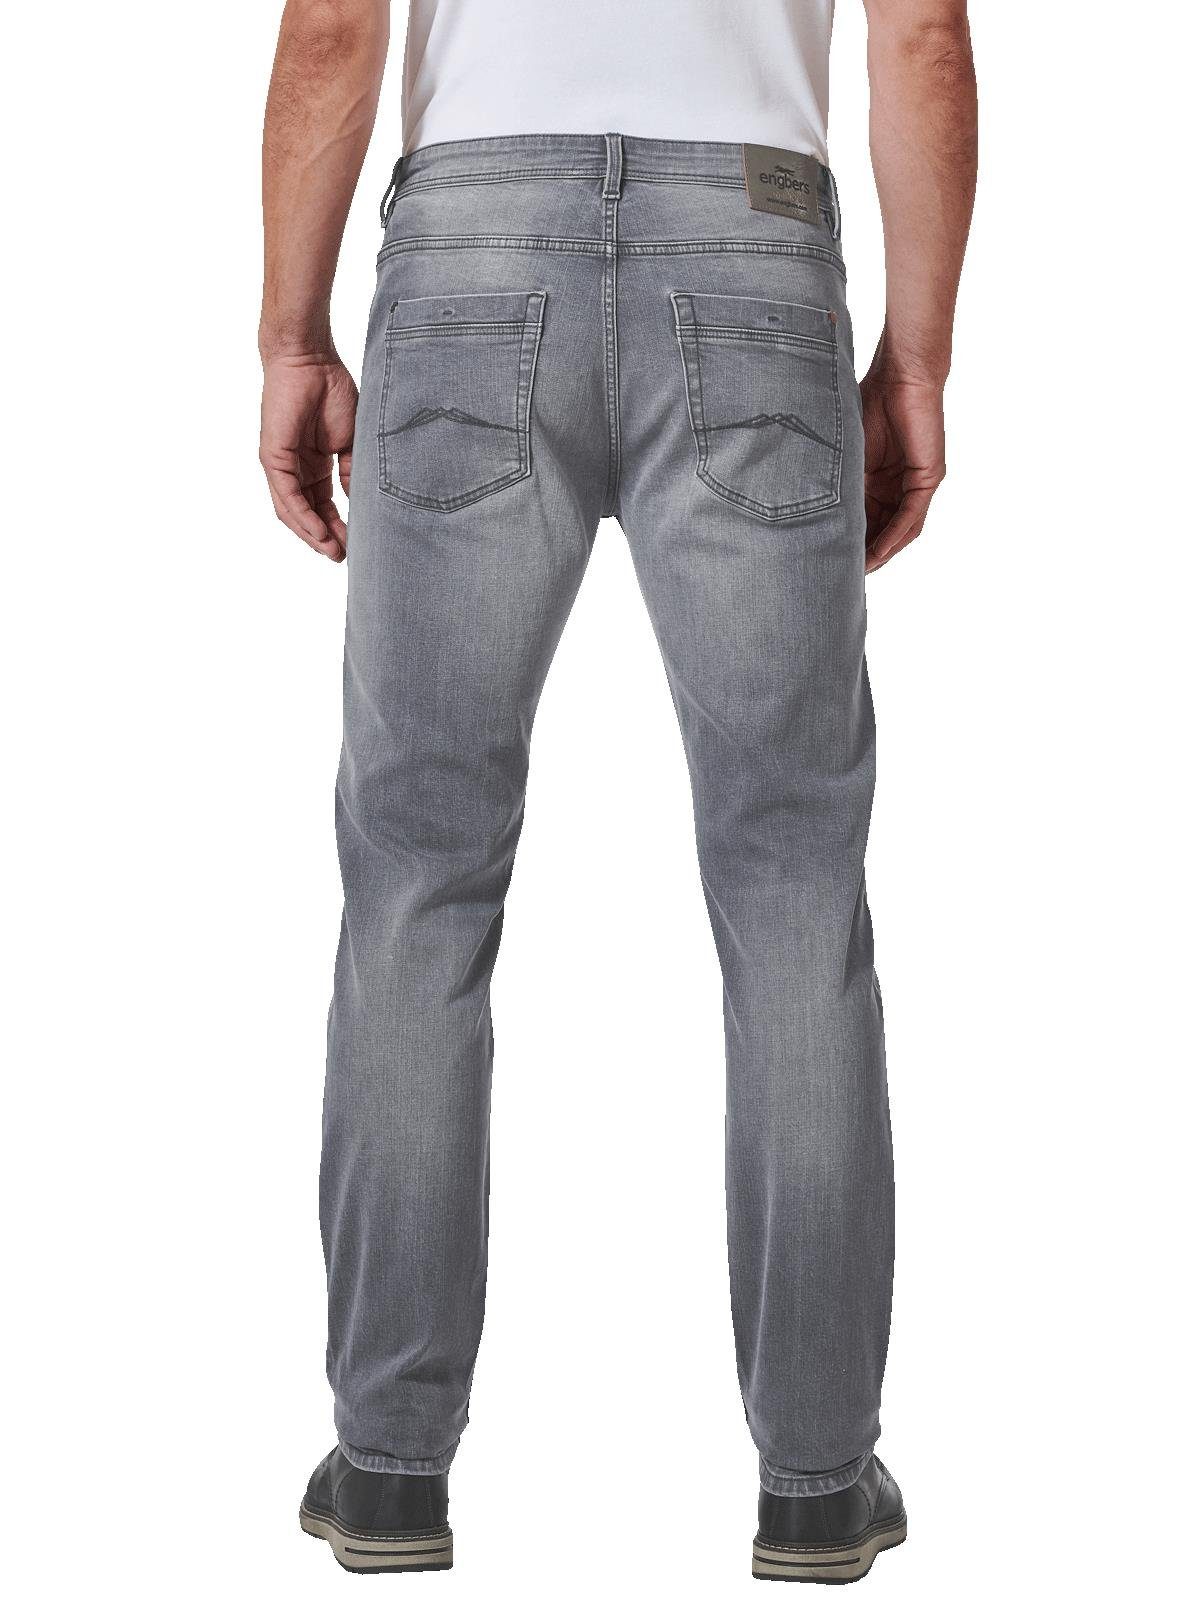 Engbers Jeans slim fit Stretch-Jeans